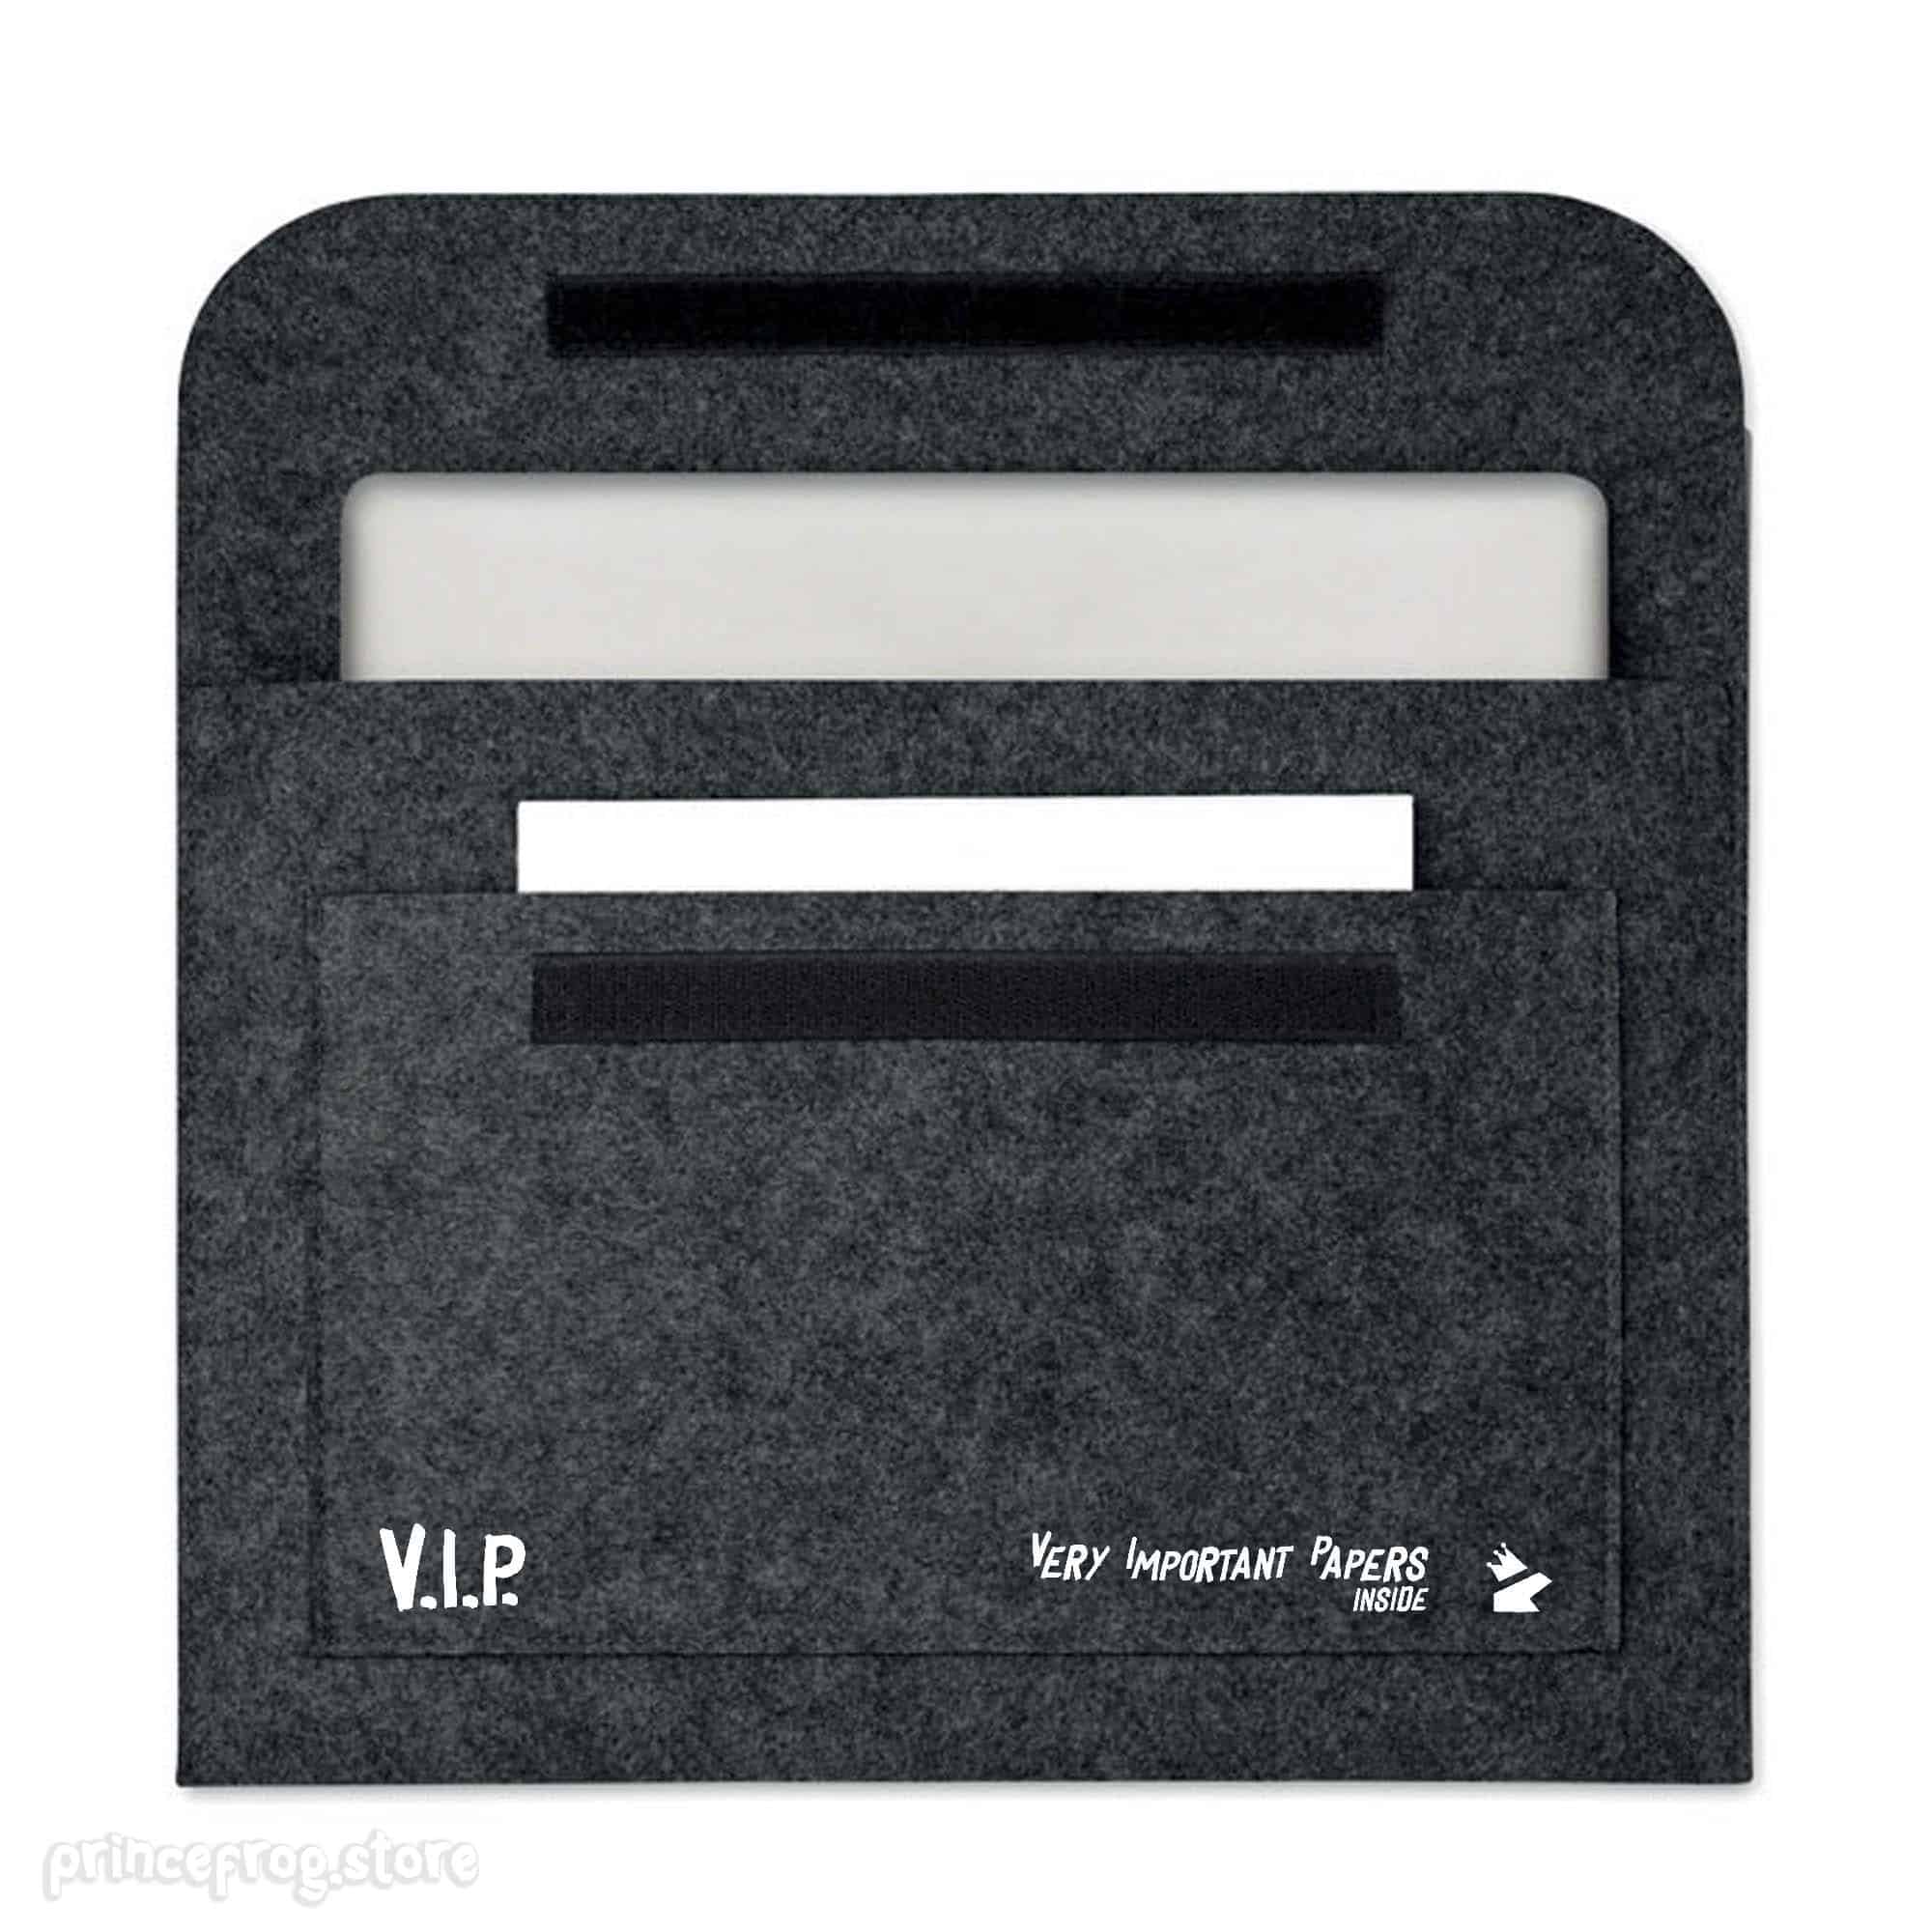 Folder V.I.P. (Very Important Papers) 2